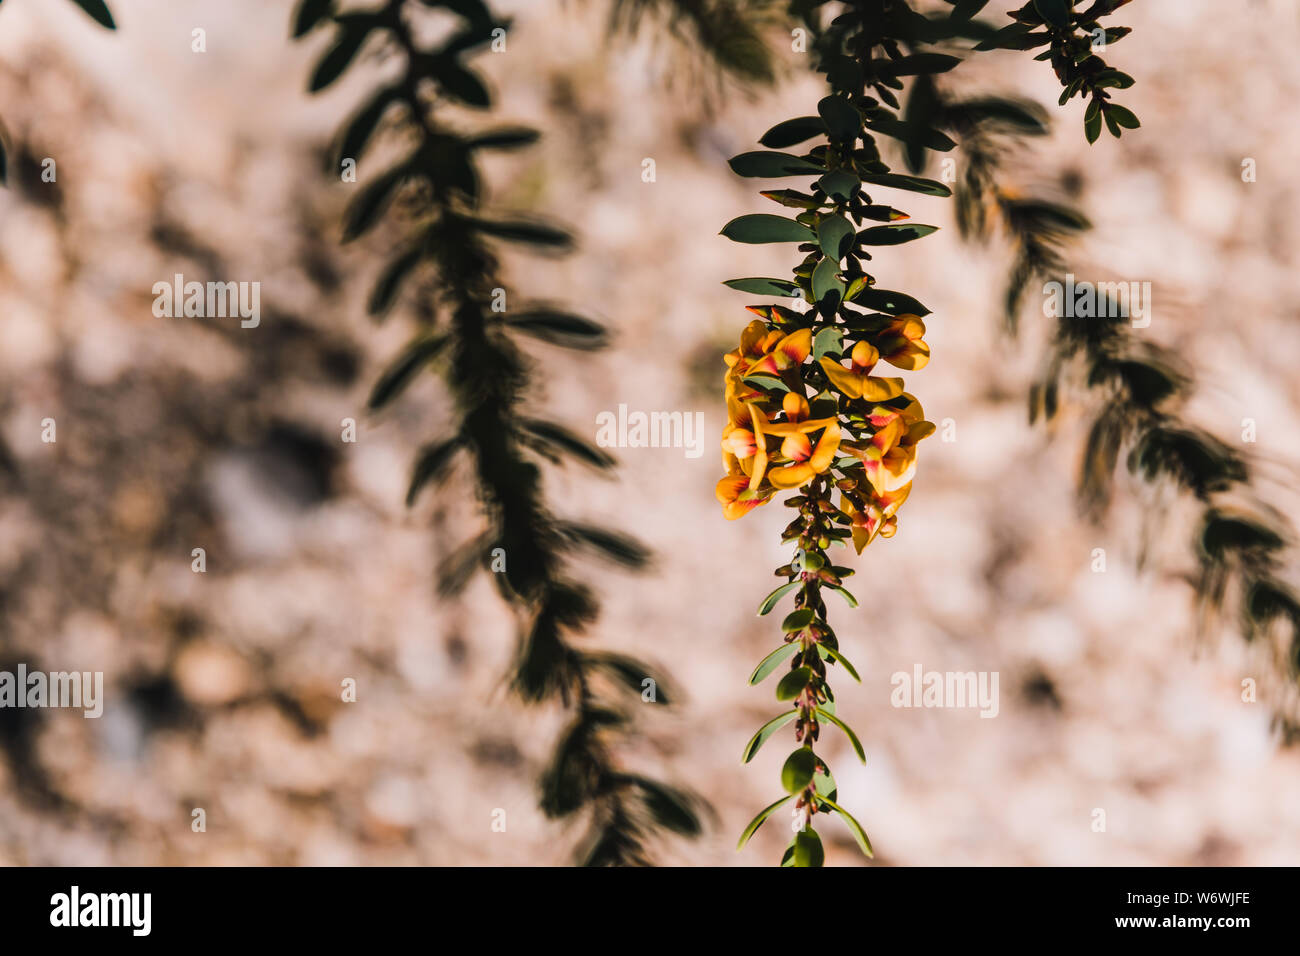 eutaxia obovata (also called egg and bacon plant) with green spiky leaves and yellow blossons, shot at shallow depth of field Stock Photo